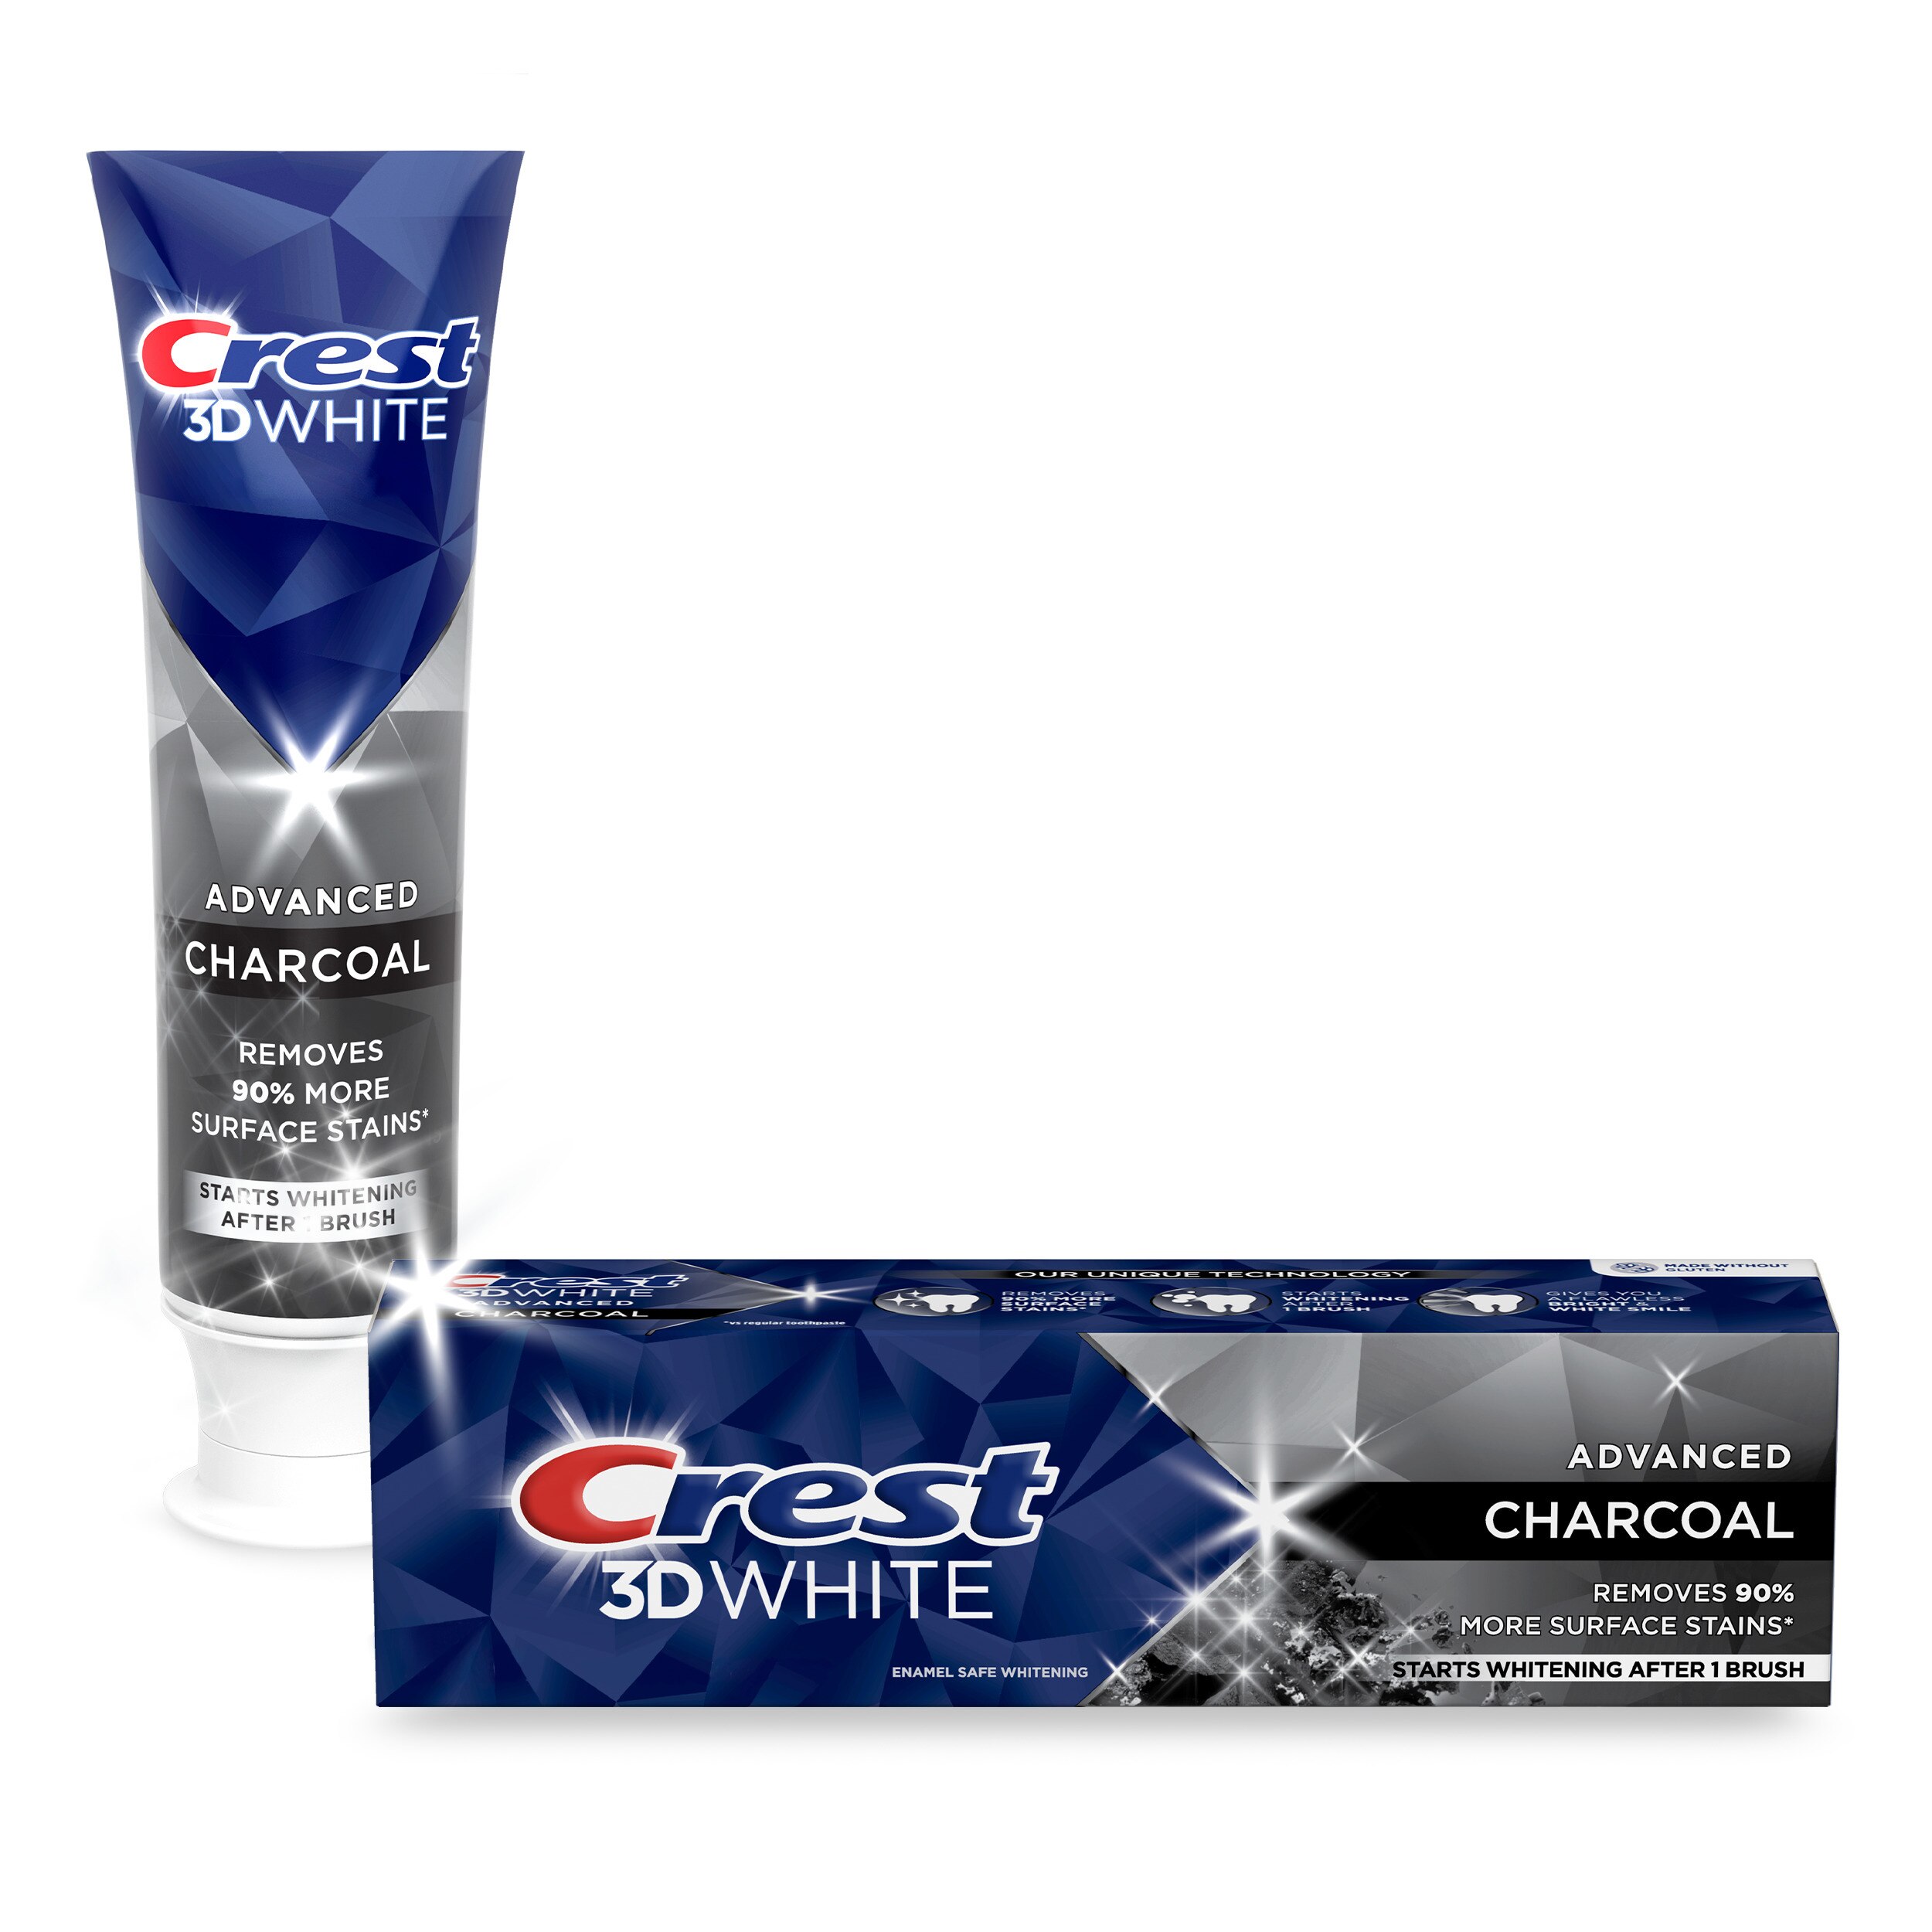 Crest 3D White Charcoal Teeth Whitening Toothpaste